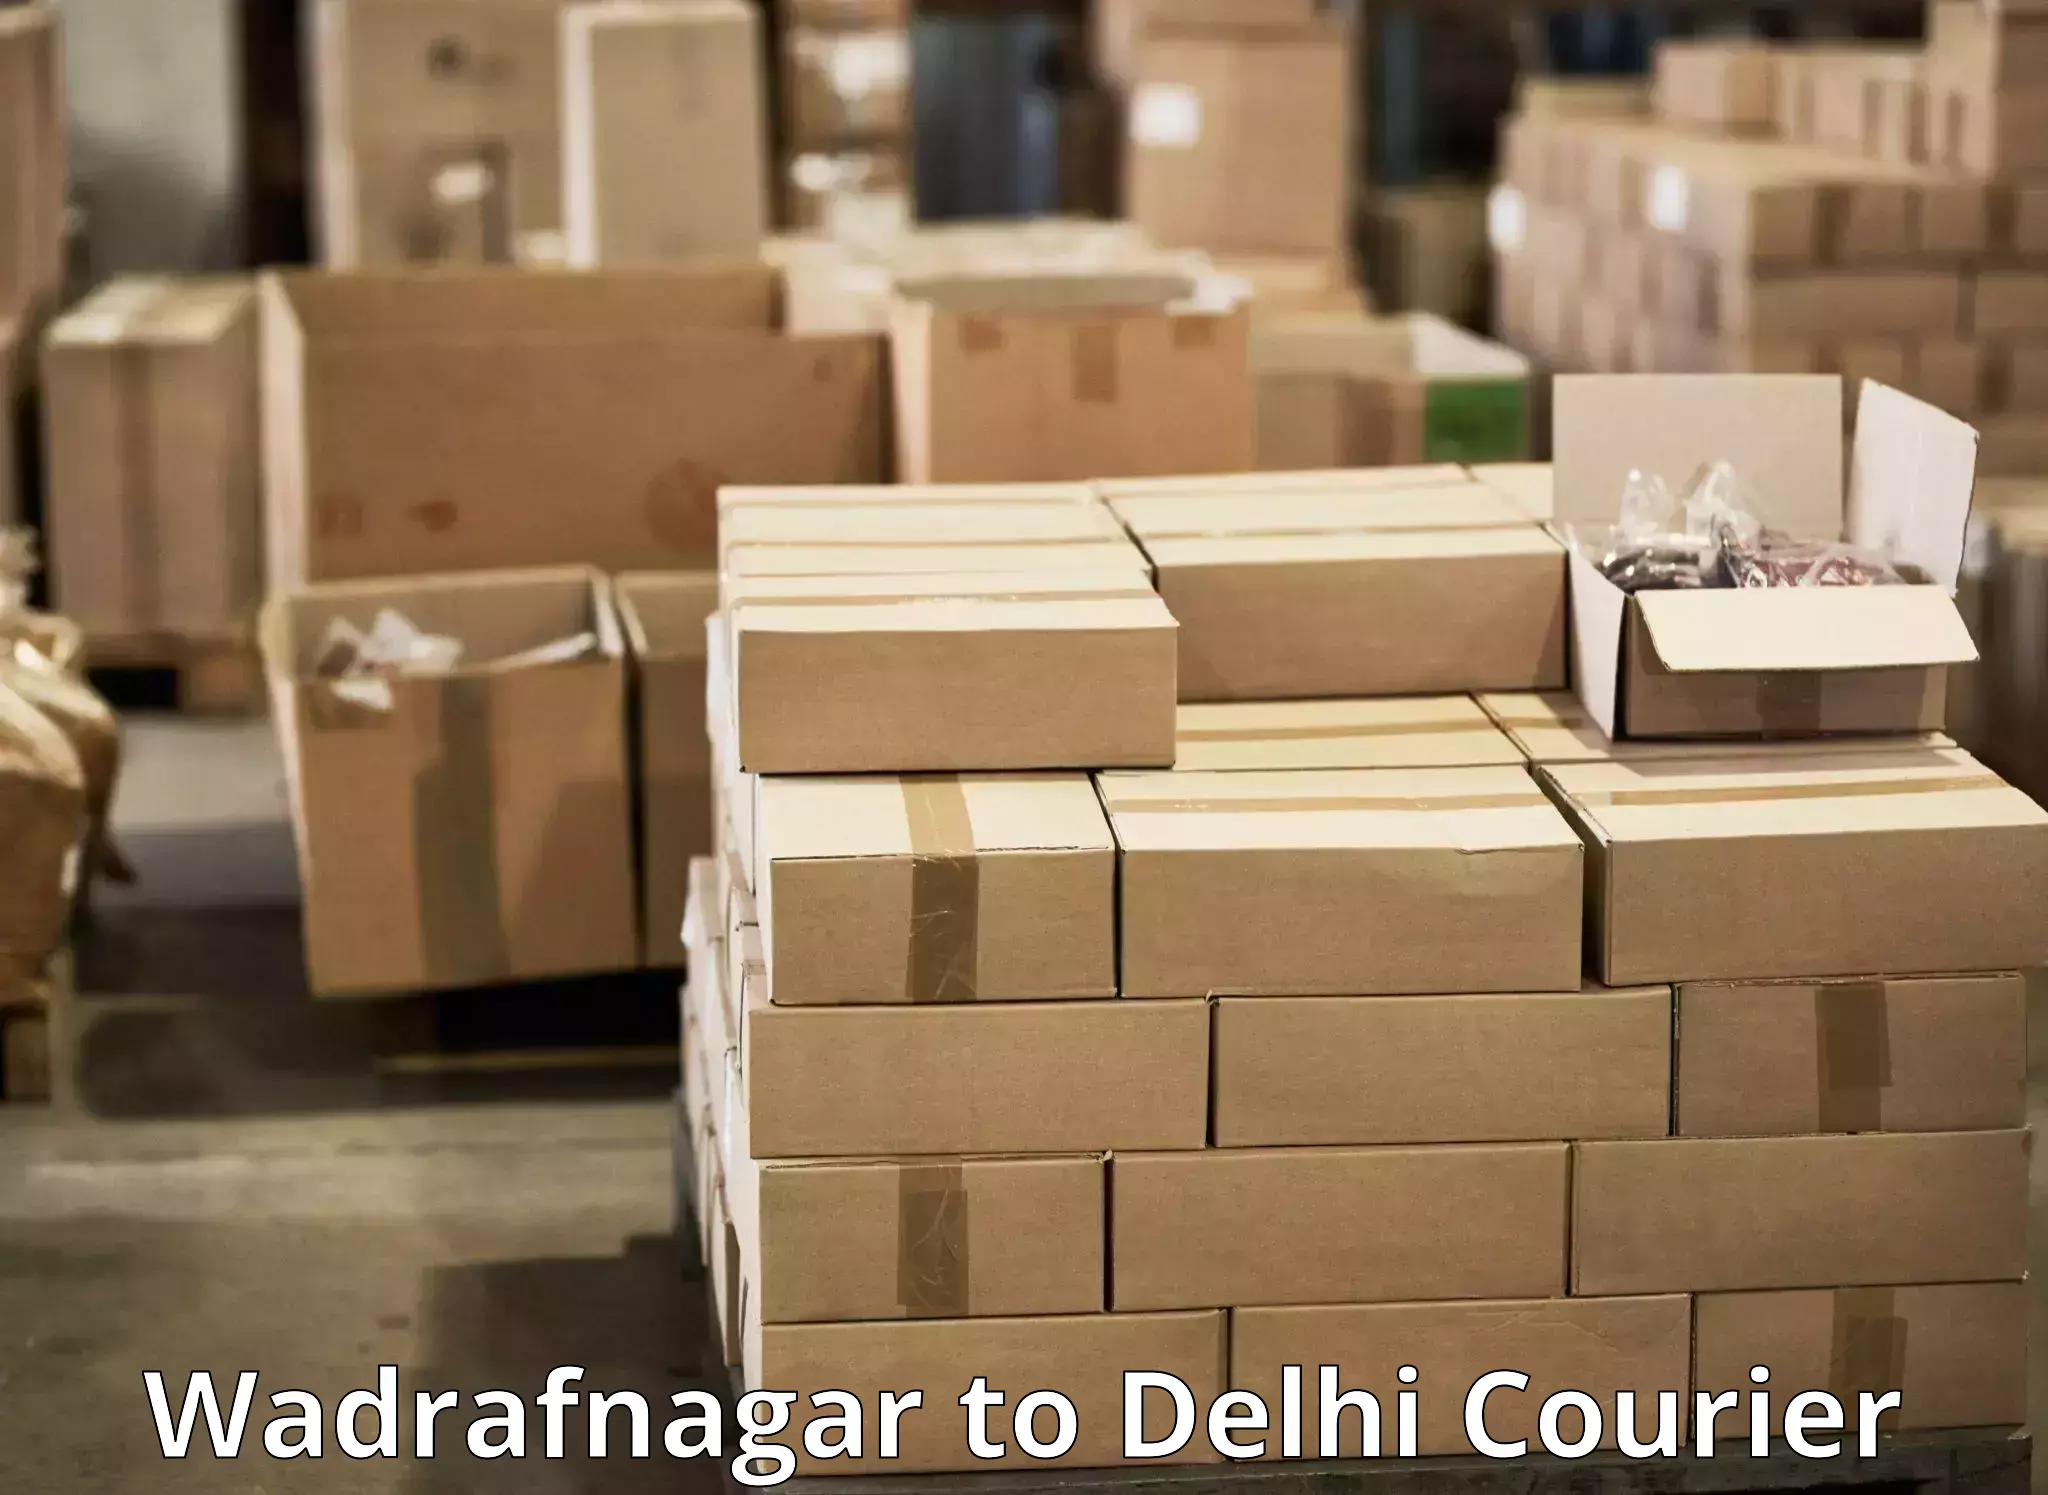 Easy access courier services Wadrafnagar to NCR